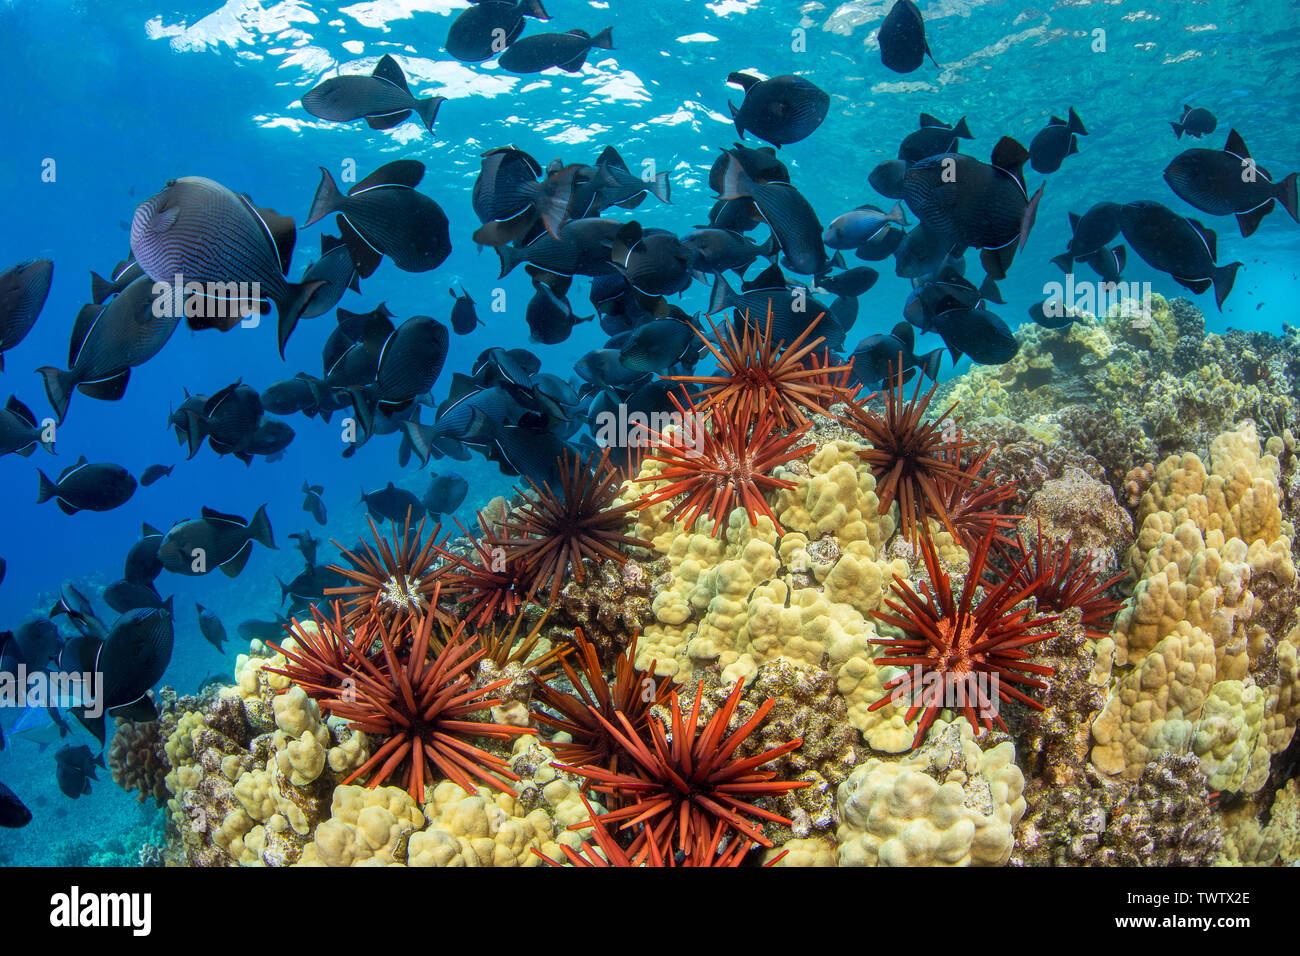 Slate pencil sea urchins, Heterocentrotus mammillatus, color the foreground of this Hawaiian reef scene with black triggerfish, Melichthys niger.  The Stock Photo